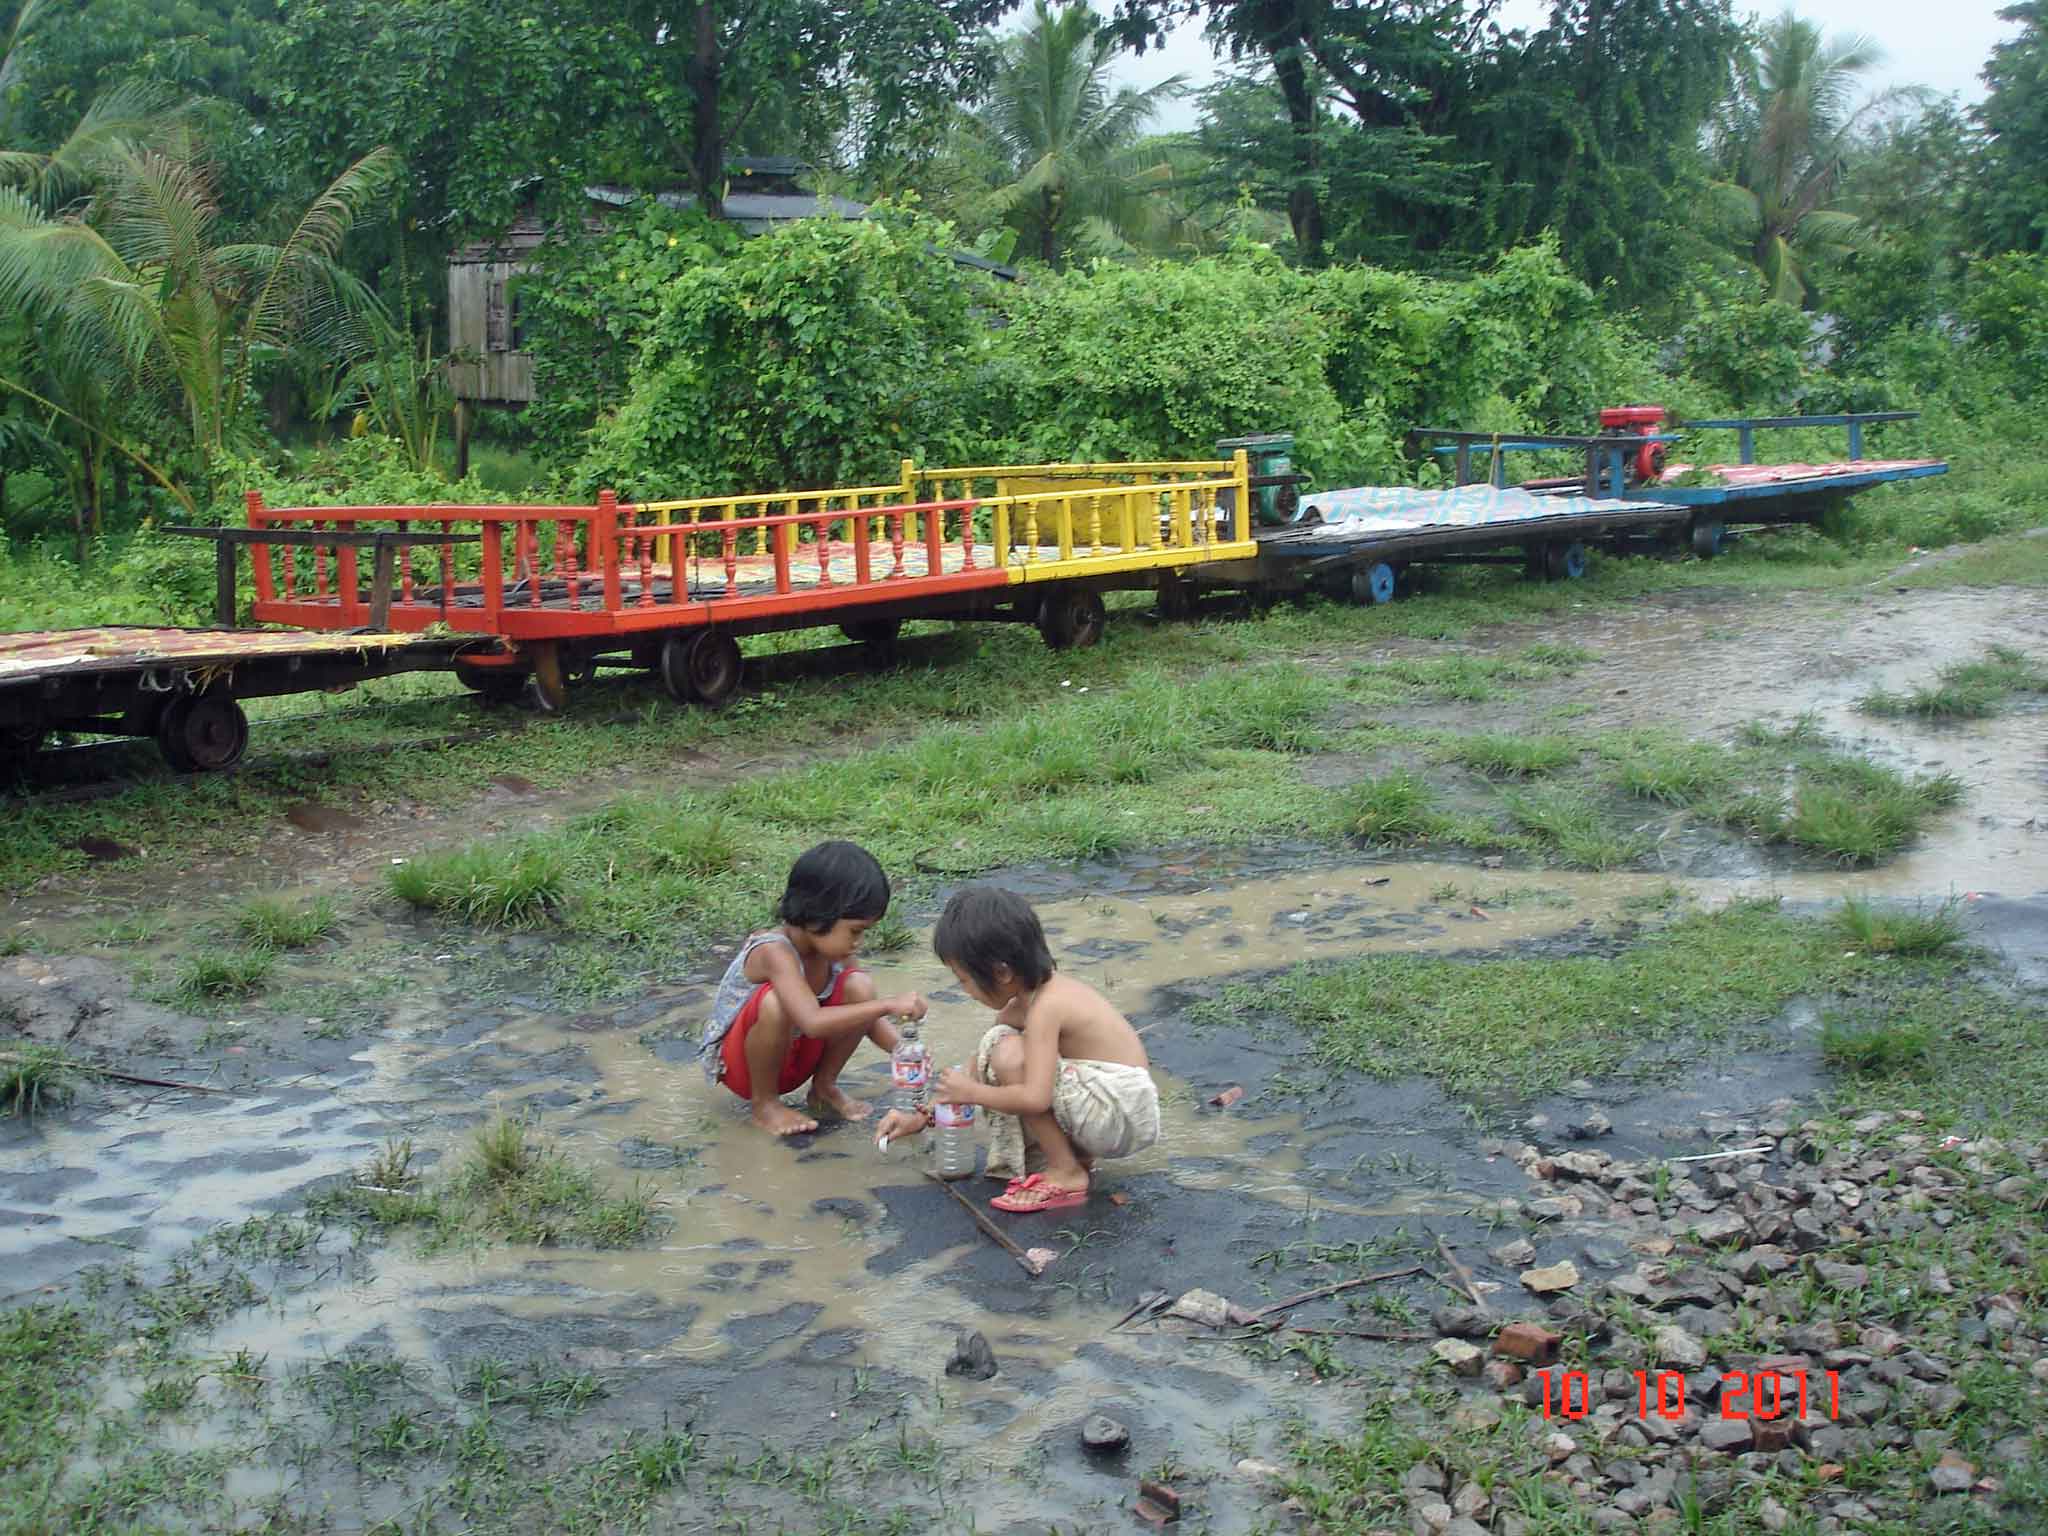 Children playing in the puddles beside Bamboo Train (Norry)